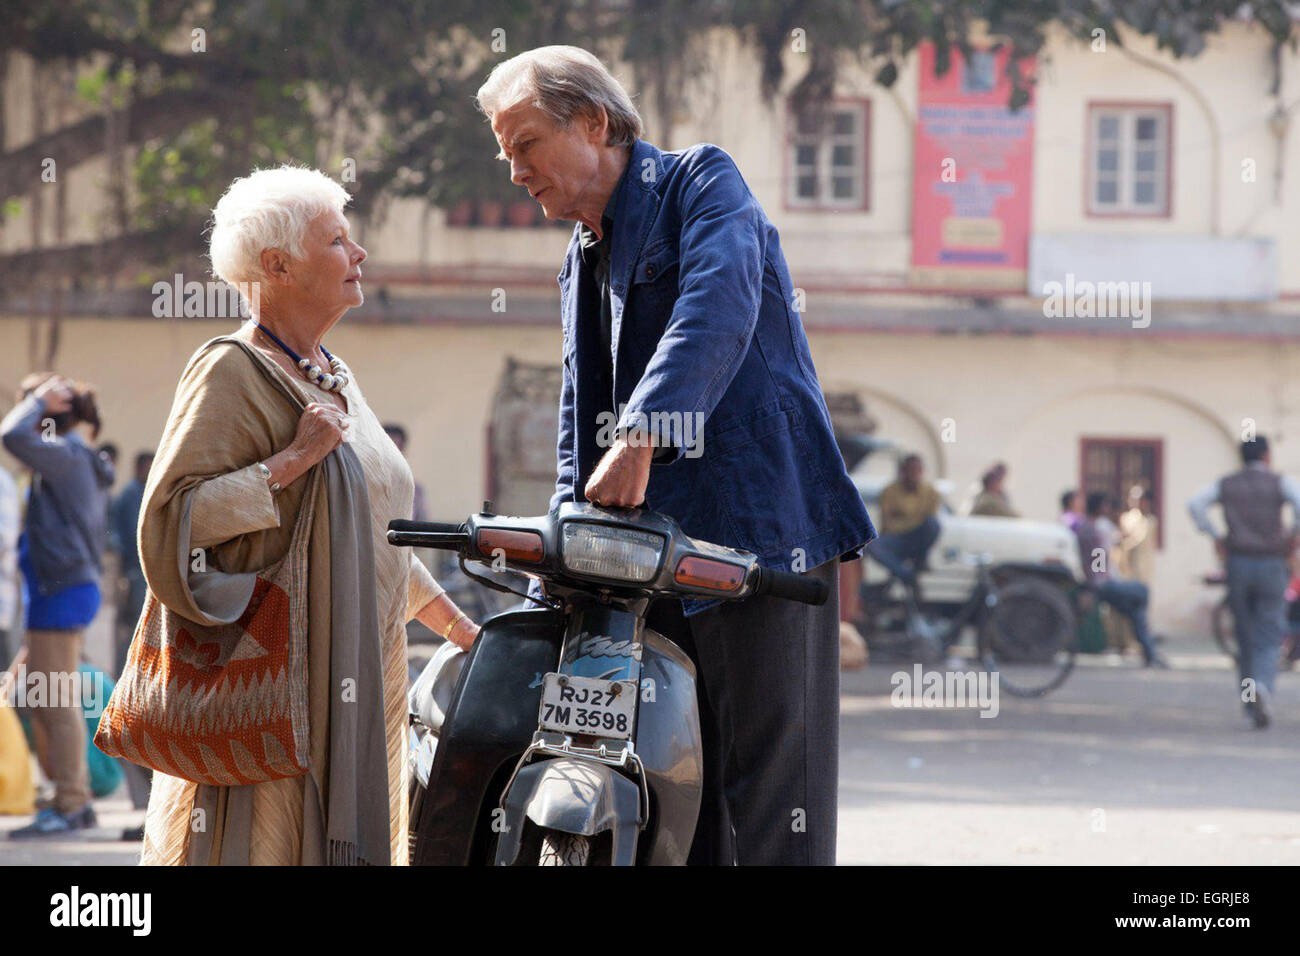 The Second Best Exotic Marigold Hotel is a 2015 British comedy-drama film directed by John Madden and written by Ol Parker. It is the sequel to the 2012 sleeper hit film The Best Exotic Marigold Hotel and features an ensemble cast featuring Judi Dench, Maggie Smith, Bill Nighy, Celia Imrie, Penelope Wilton, Ronald Pickup, Diana Hardcastle, Tamsin Greig, Tena Desae, Dev Patel, Lillete Dubey, David Strathairn and Richard Gere. Stock Photo